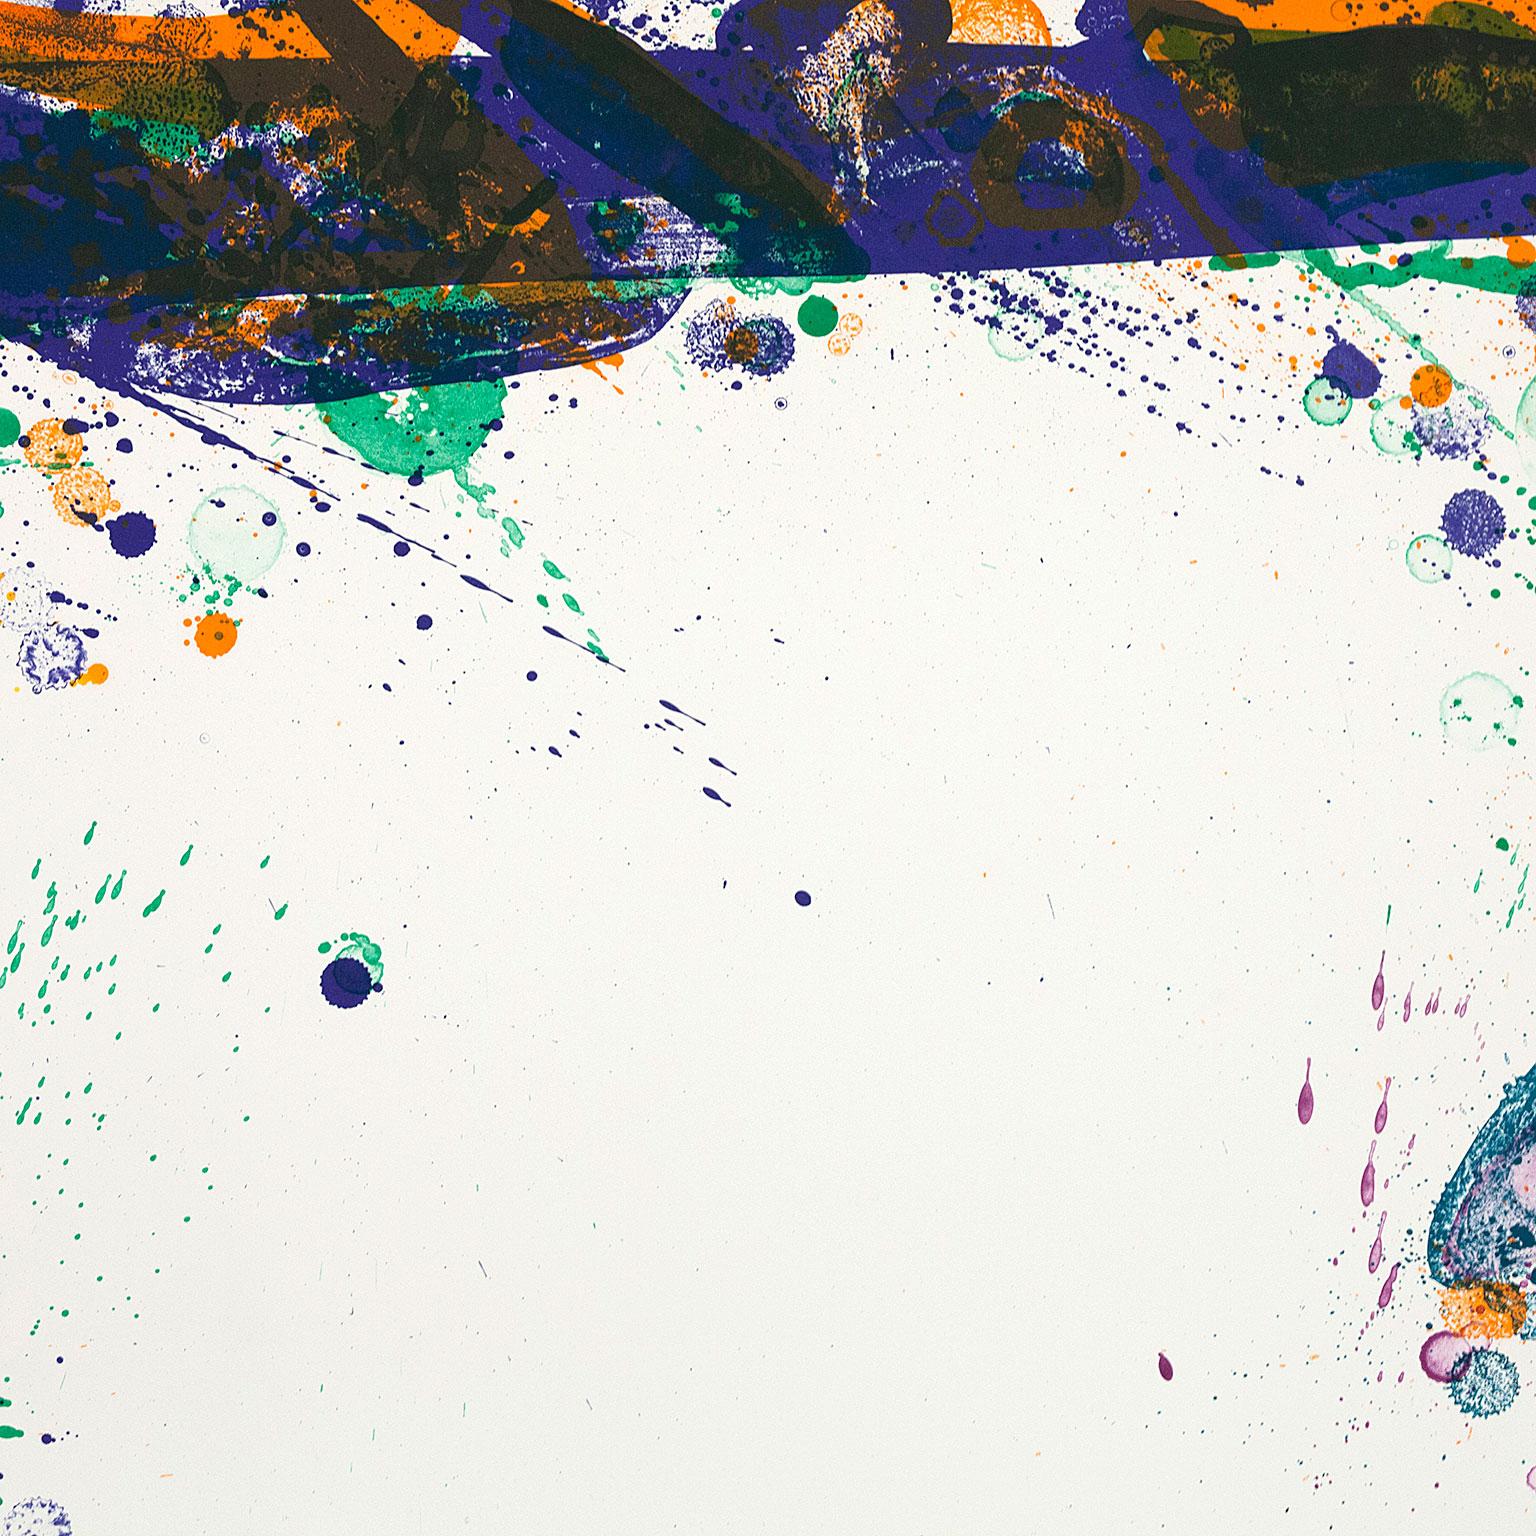 Sam Francis (b. 1923 - 1994) is known as one of America’s most dynamic abstract expressionist artists. 

Printmaking was an essential part of his practice. Similar to Robert Motherwell, Francis became so transfixed by the medium, he would establish